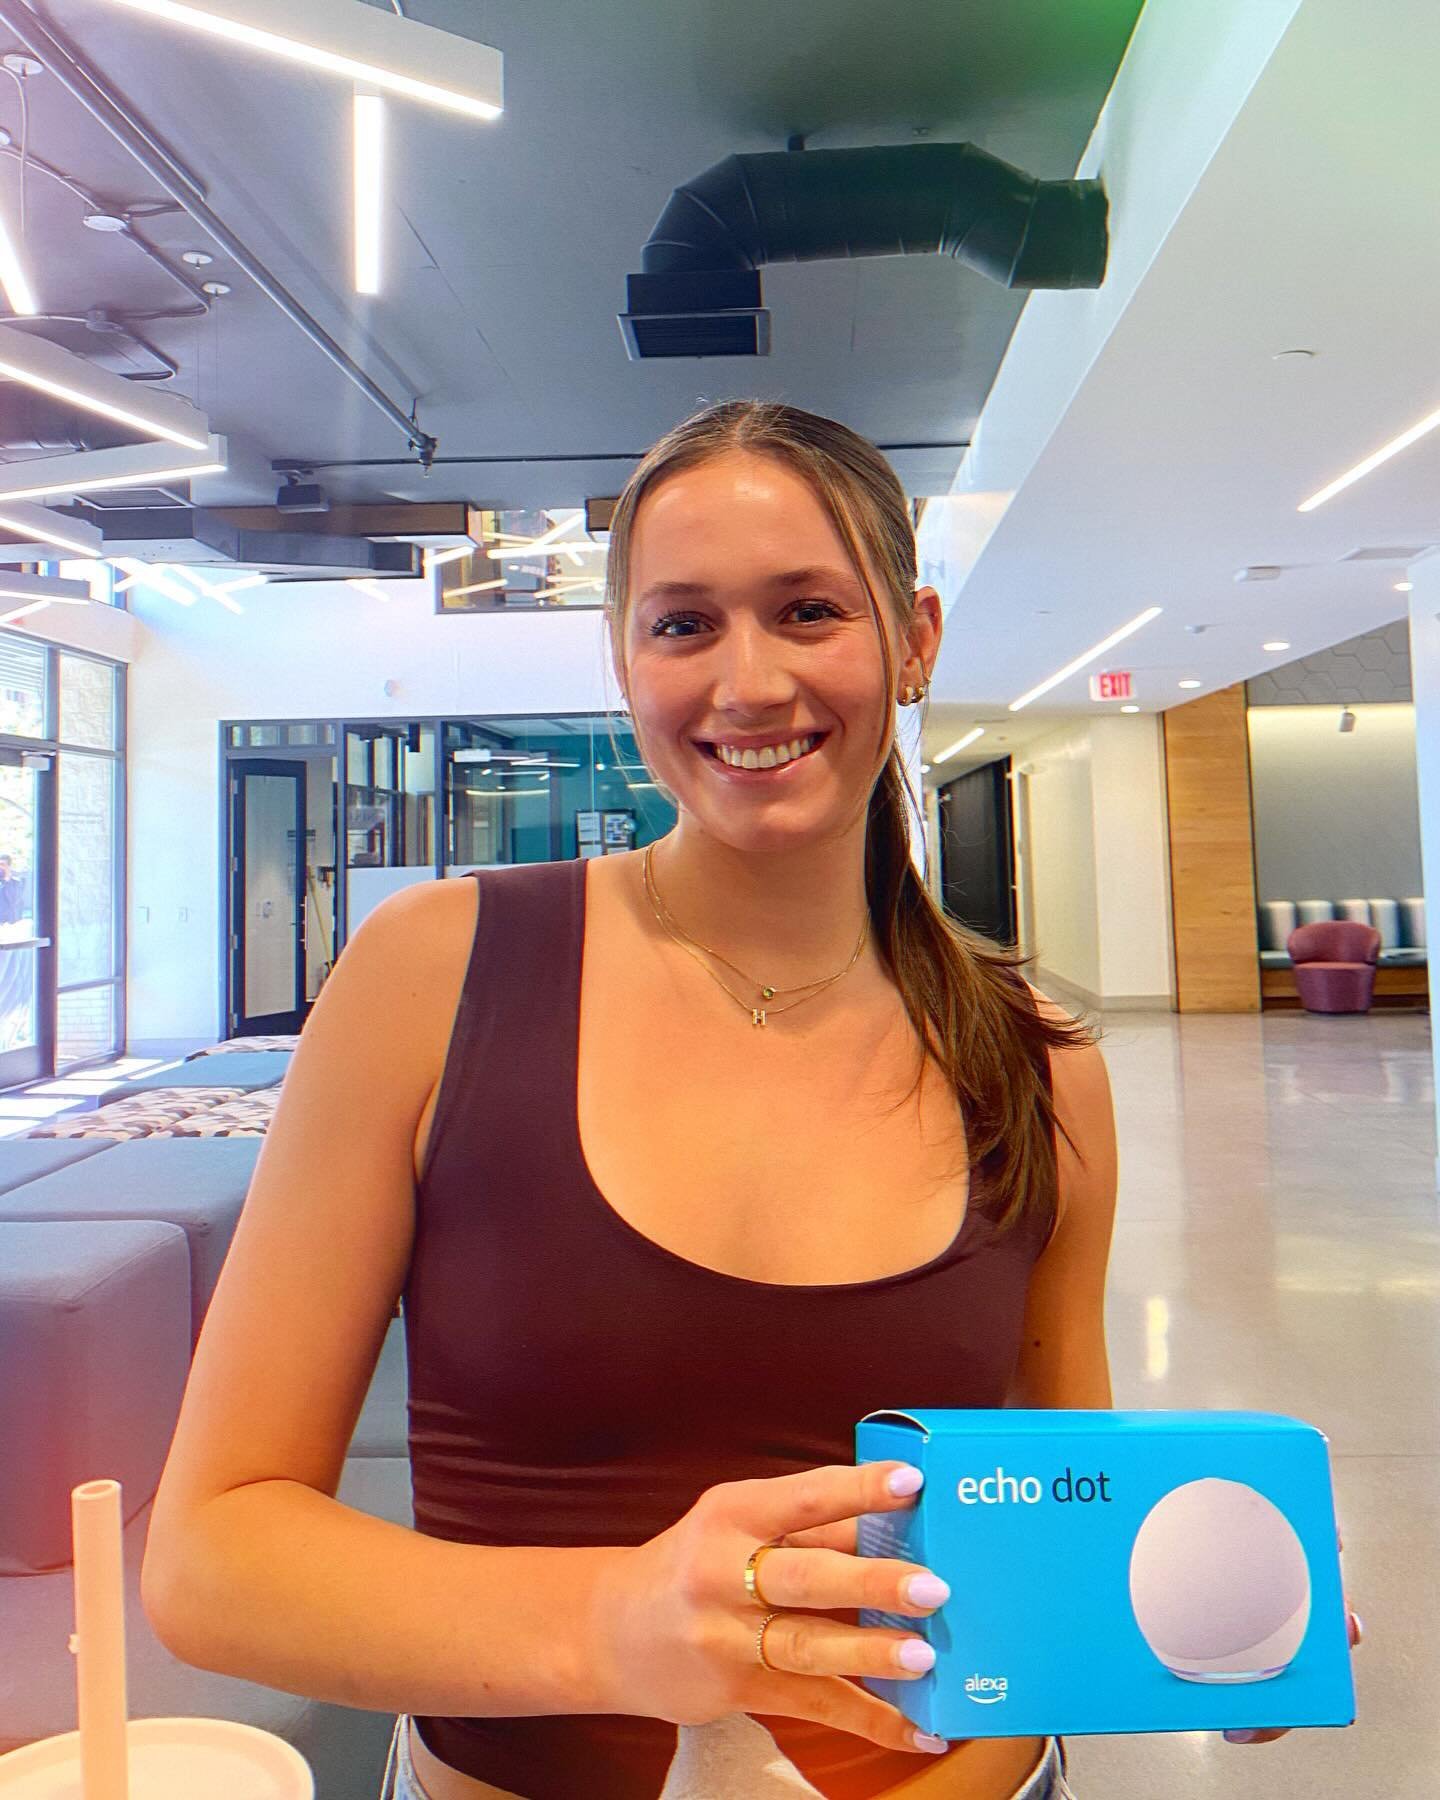 Shout out to @hannahlatto for winning our March Madness bracket challenge! 🏀🏆 Want to be a winner too?? Contact our leasing office today to score your spot before we sell out! 📞 (928) 220-3655